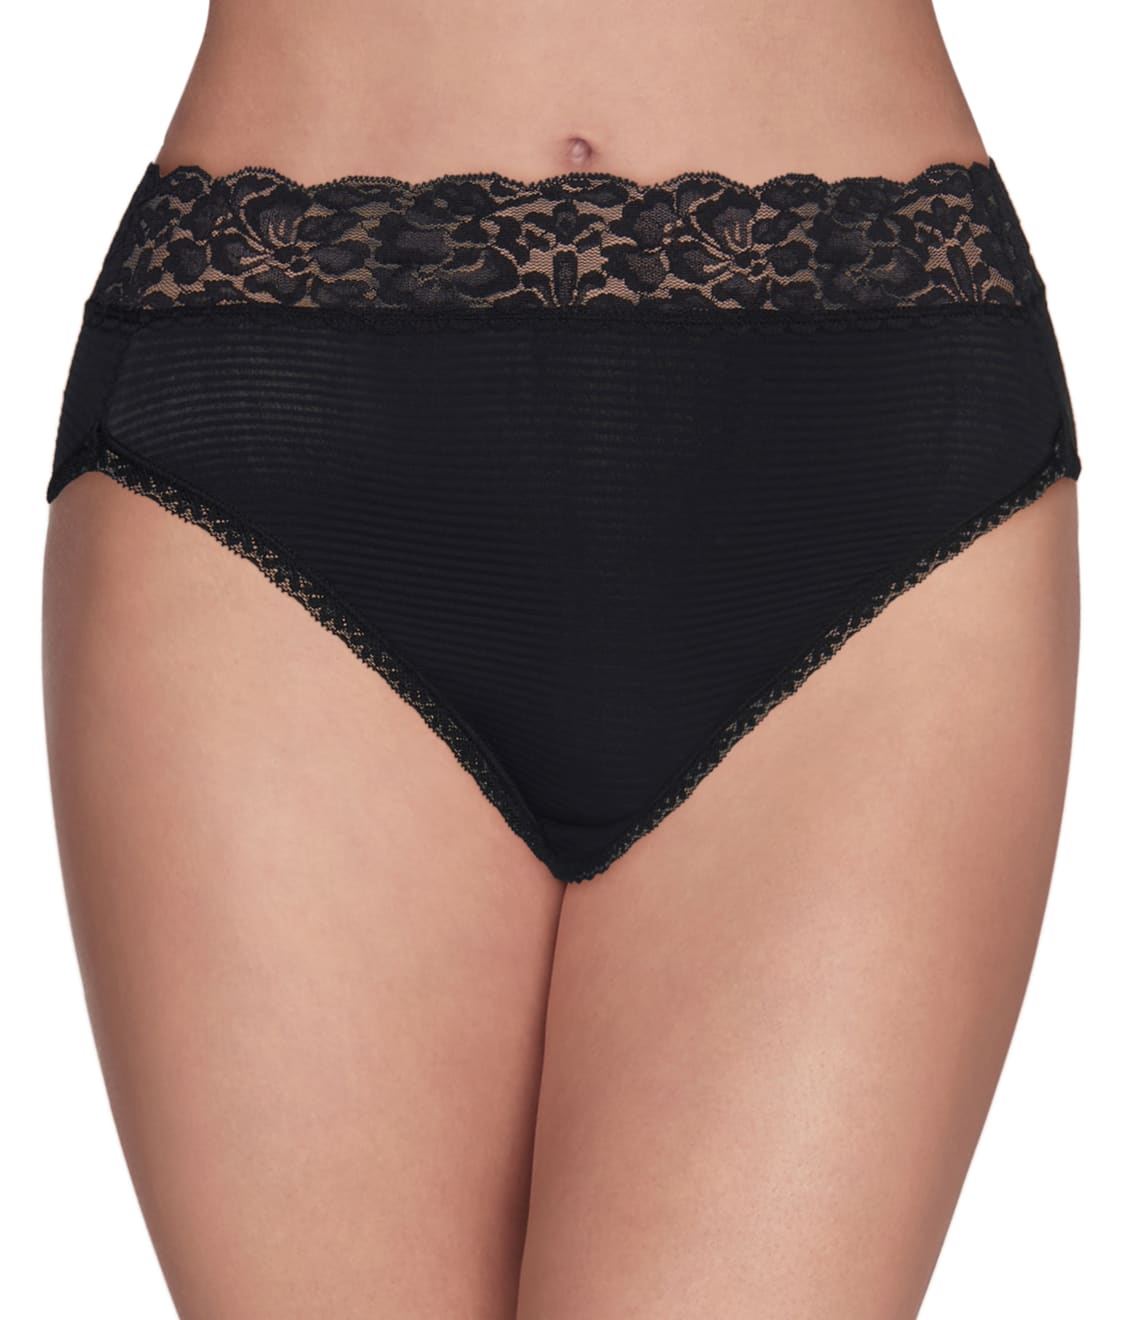 Buy Microfibre and Mesh Extra High Leg Knickers from the Laura